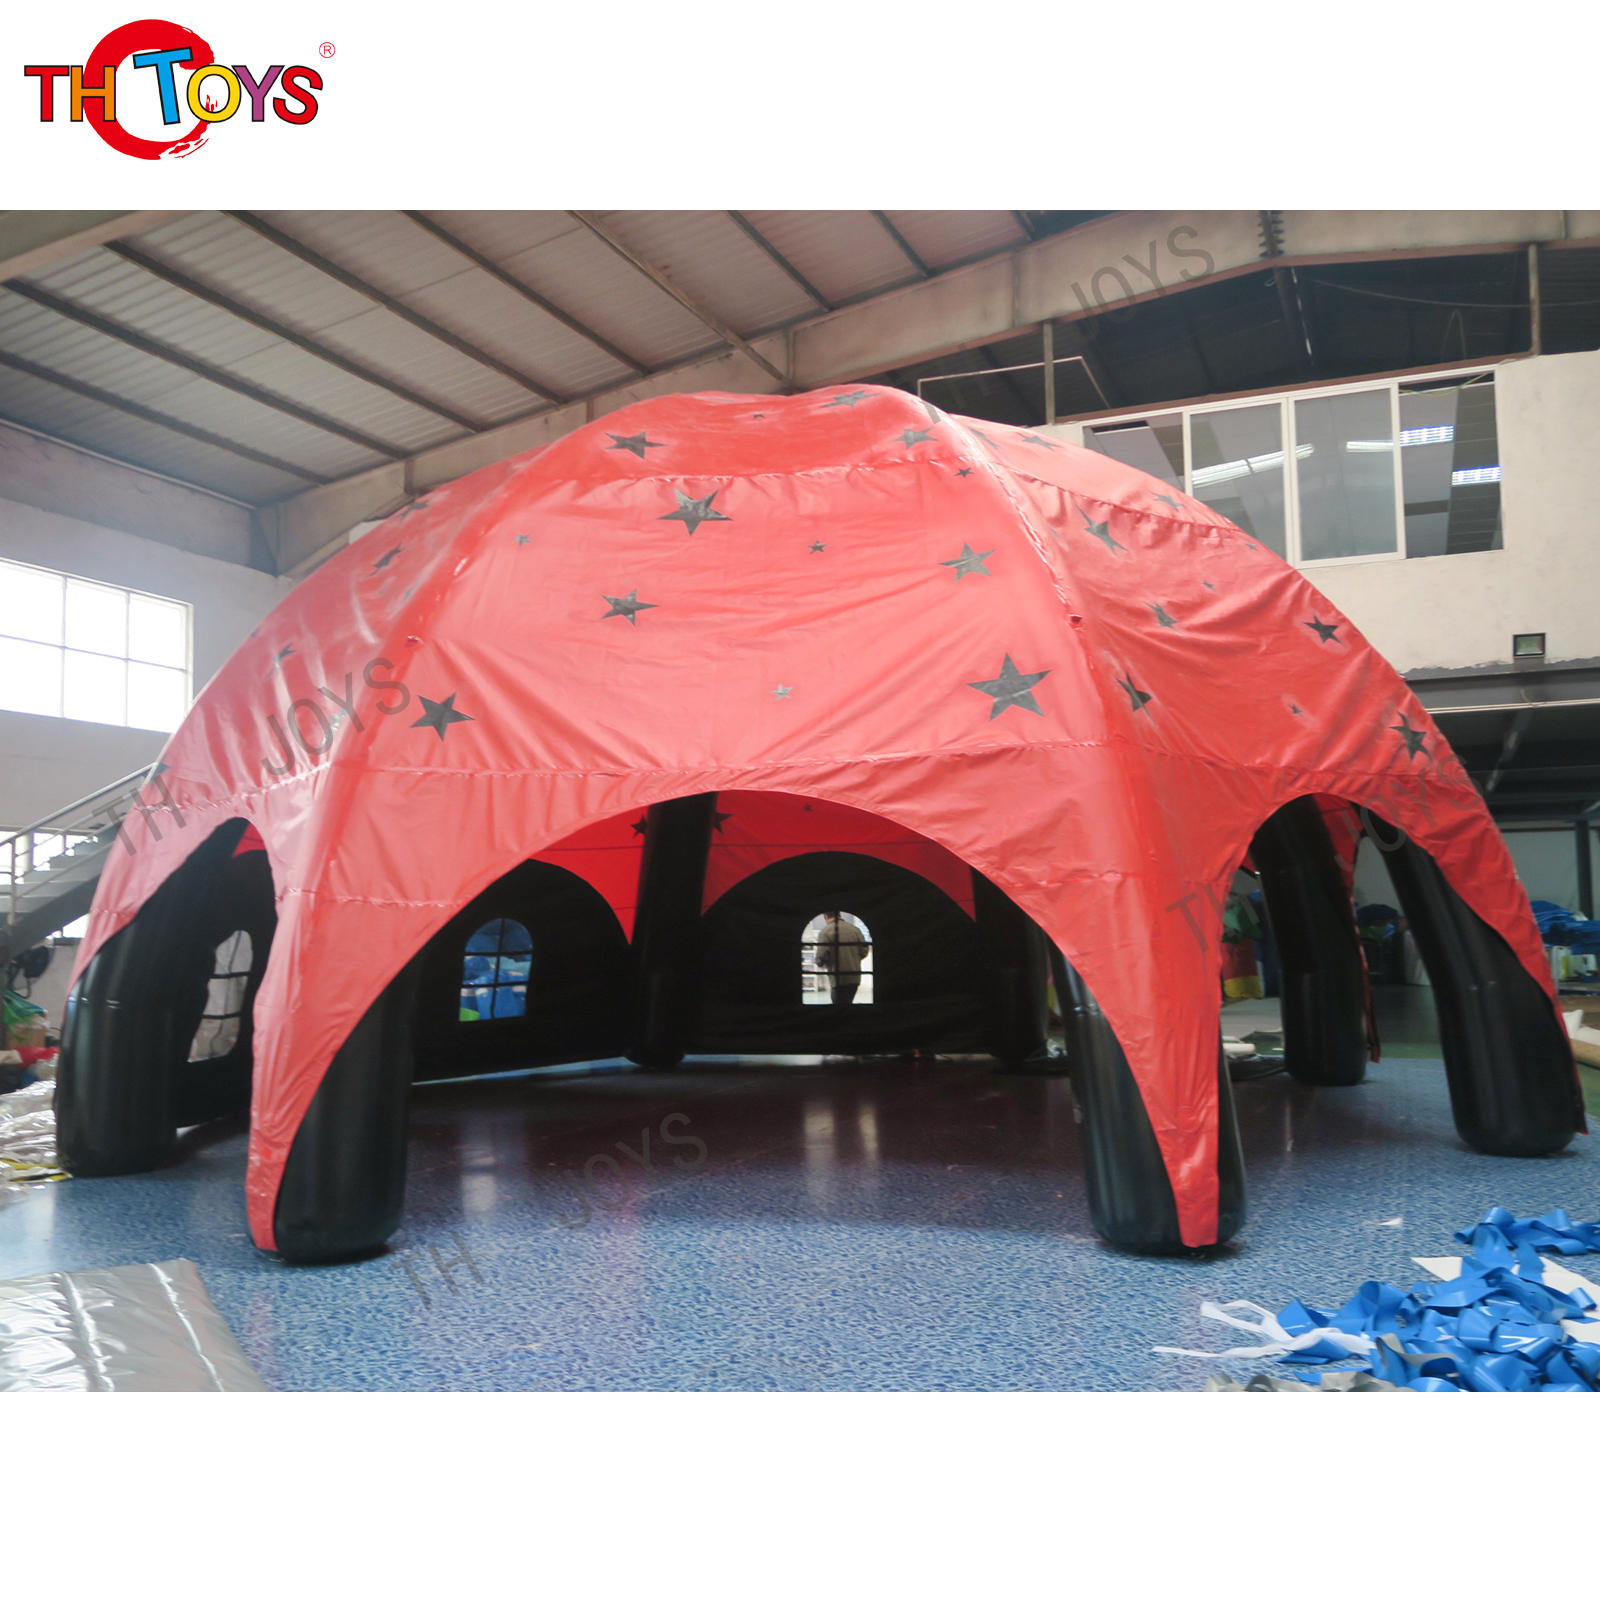 Inflatable spider tents04